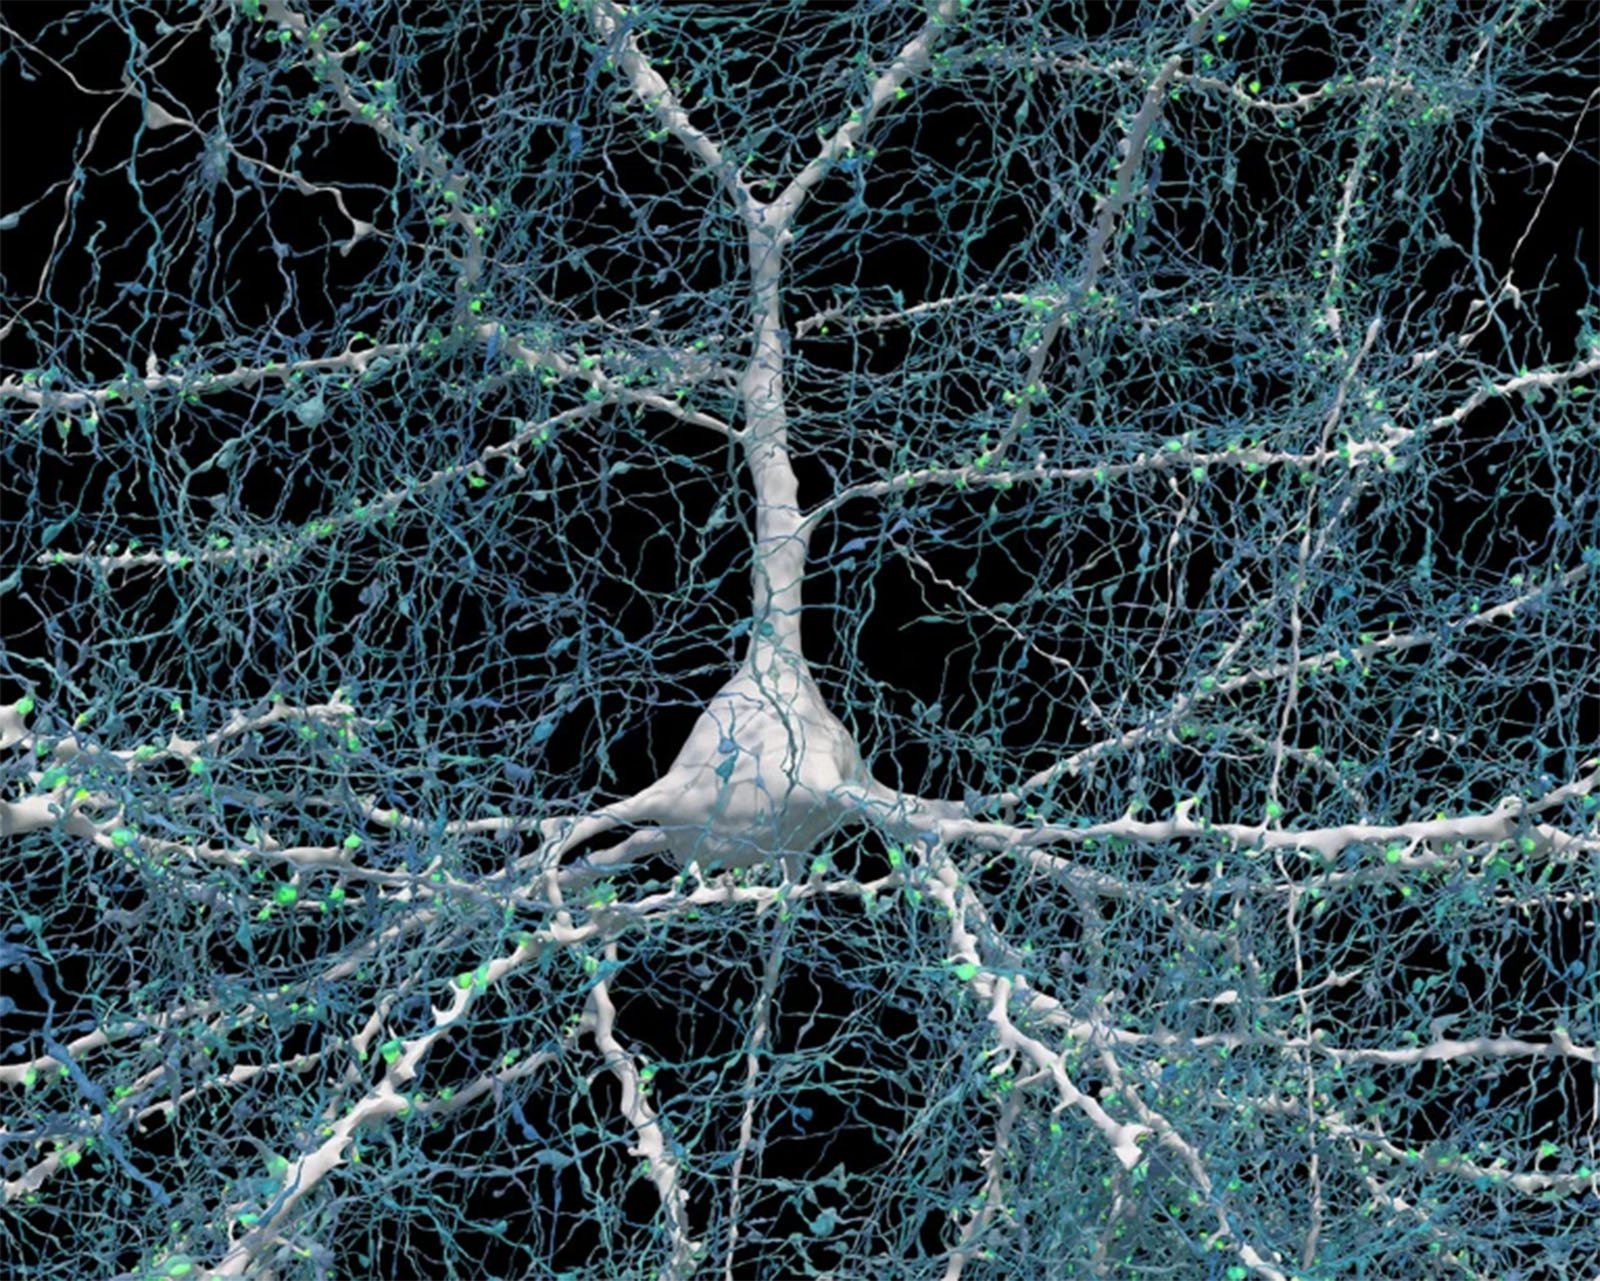 Detailed 3D rendering of a neuron cell with an extensive network of dendrites and axons highlighted in blue and green, set against a dark background.